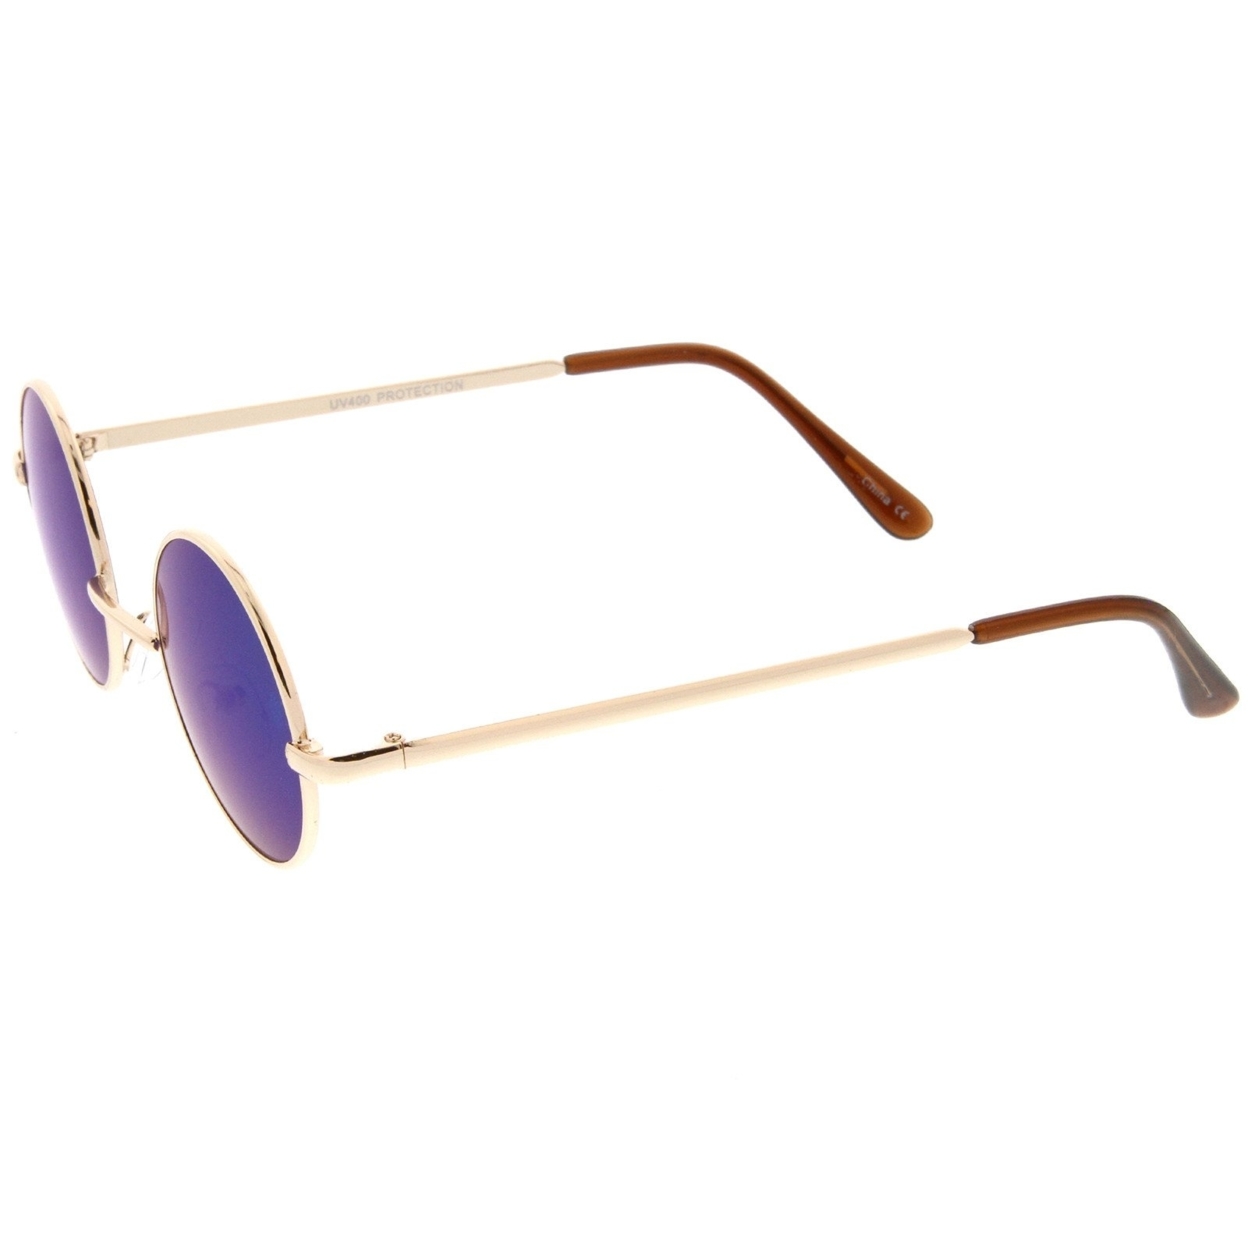 Small Retro Lennon Inspired Style Colored Mirror Lens Round Metal Sunglasses 41mm - Gold / Blue Mirror